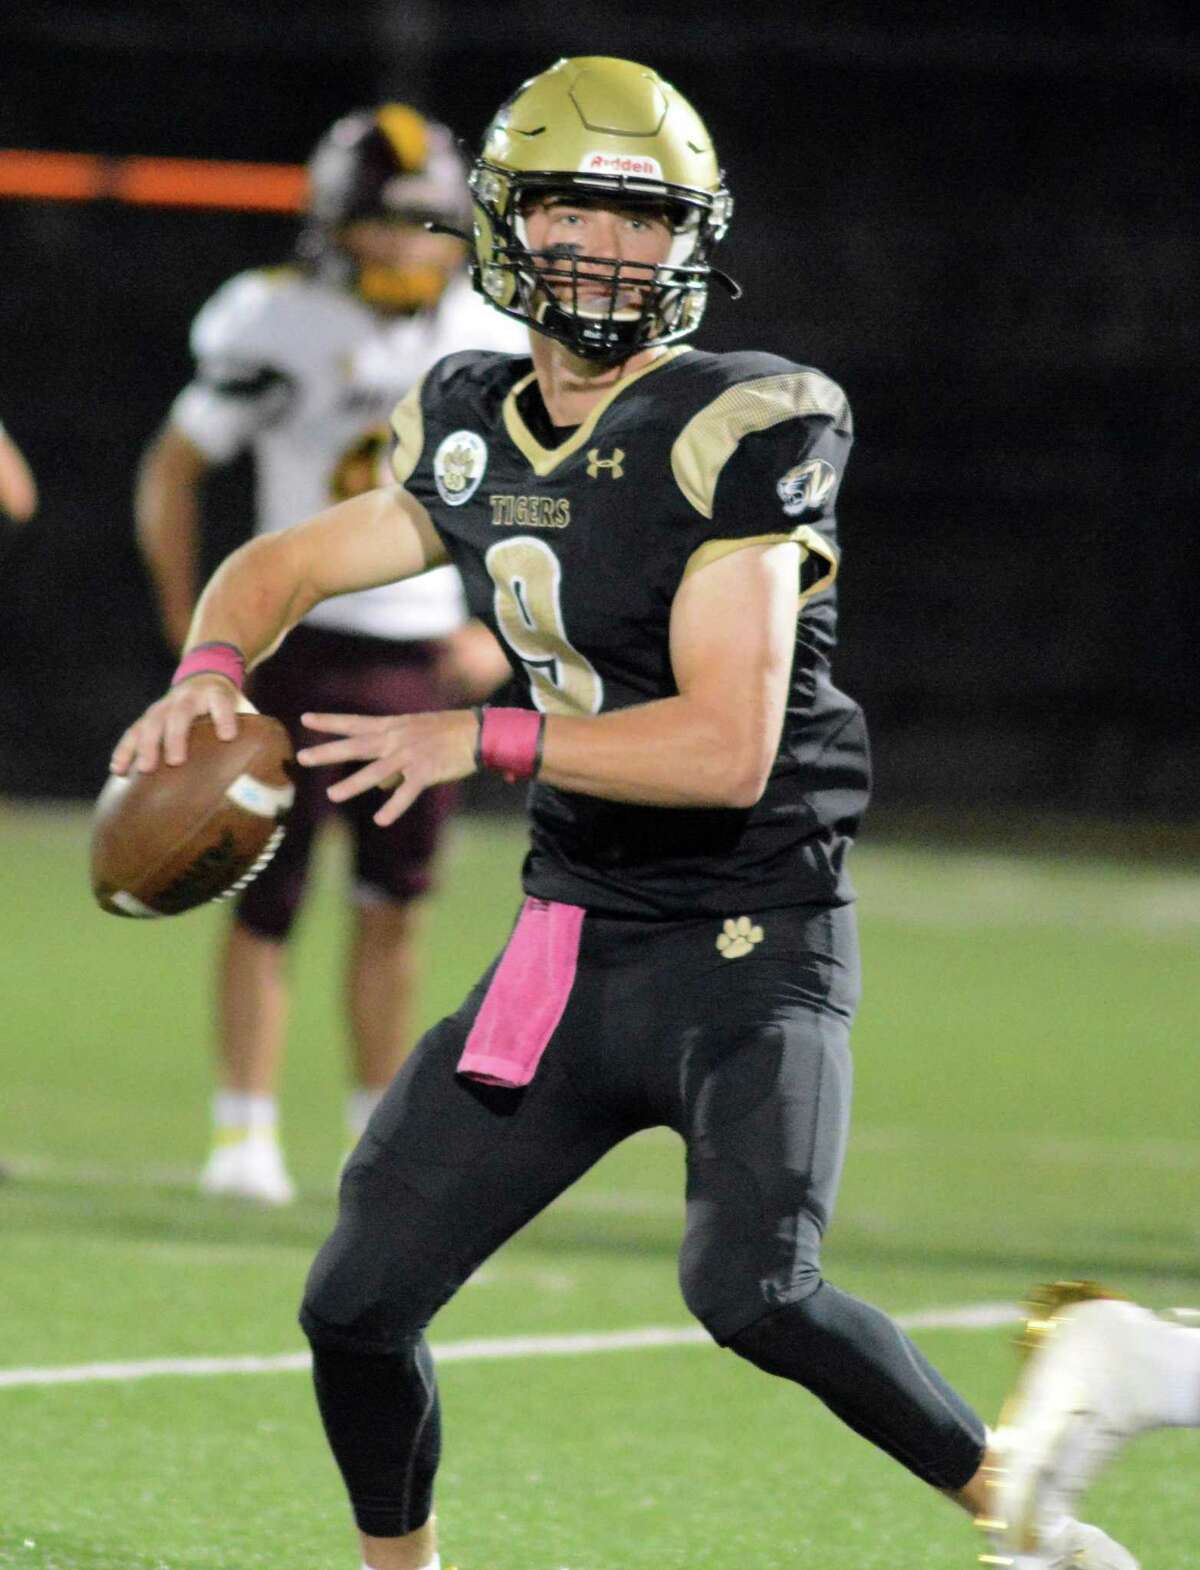 Hand QB Patch Flanagan looks for a receiver during a football game Friday night.